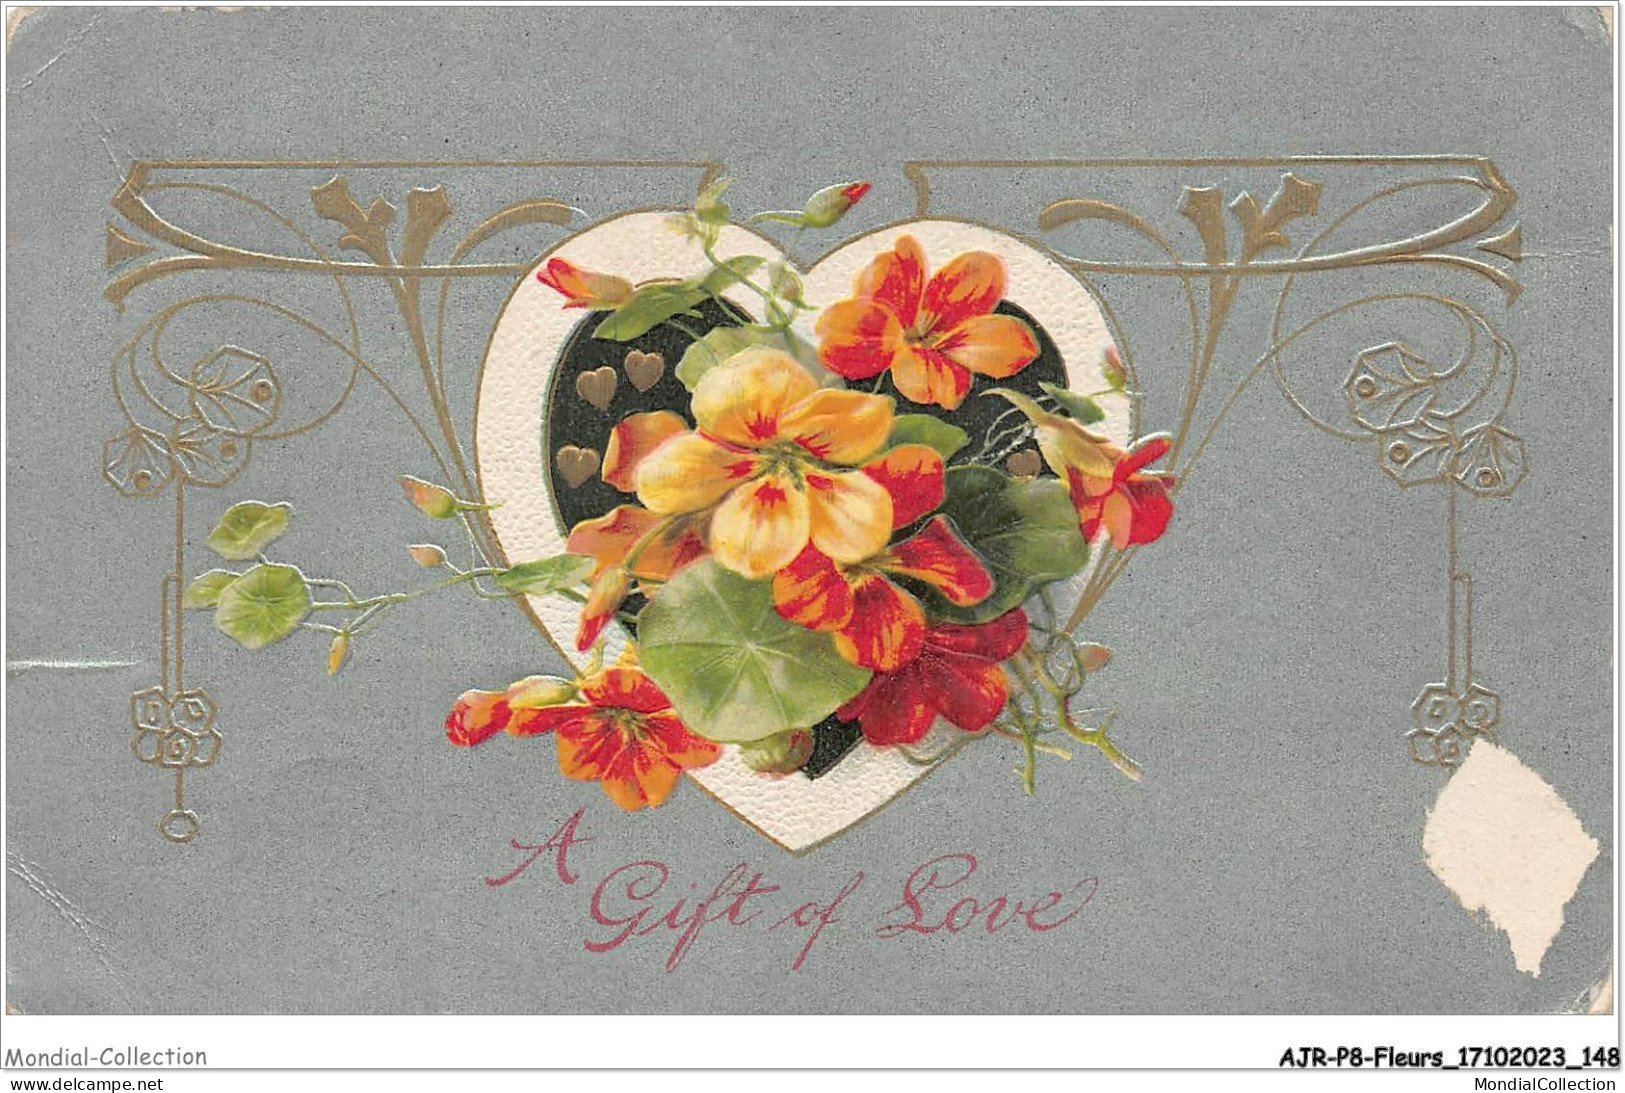 AJRP8-0858 - FLEURS - A GIFT OF LOVE - PENSEE  - Flowers